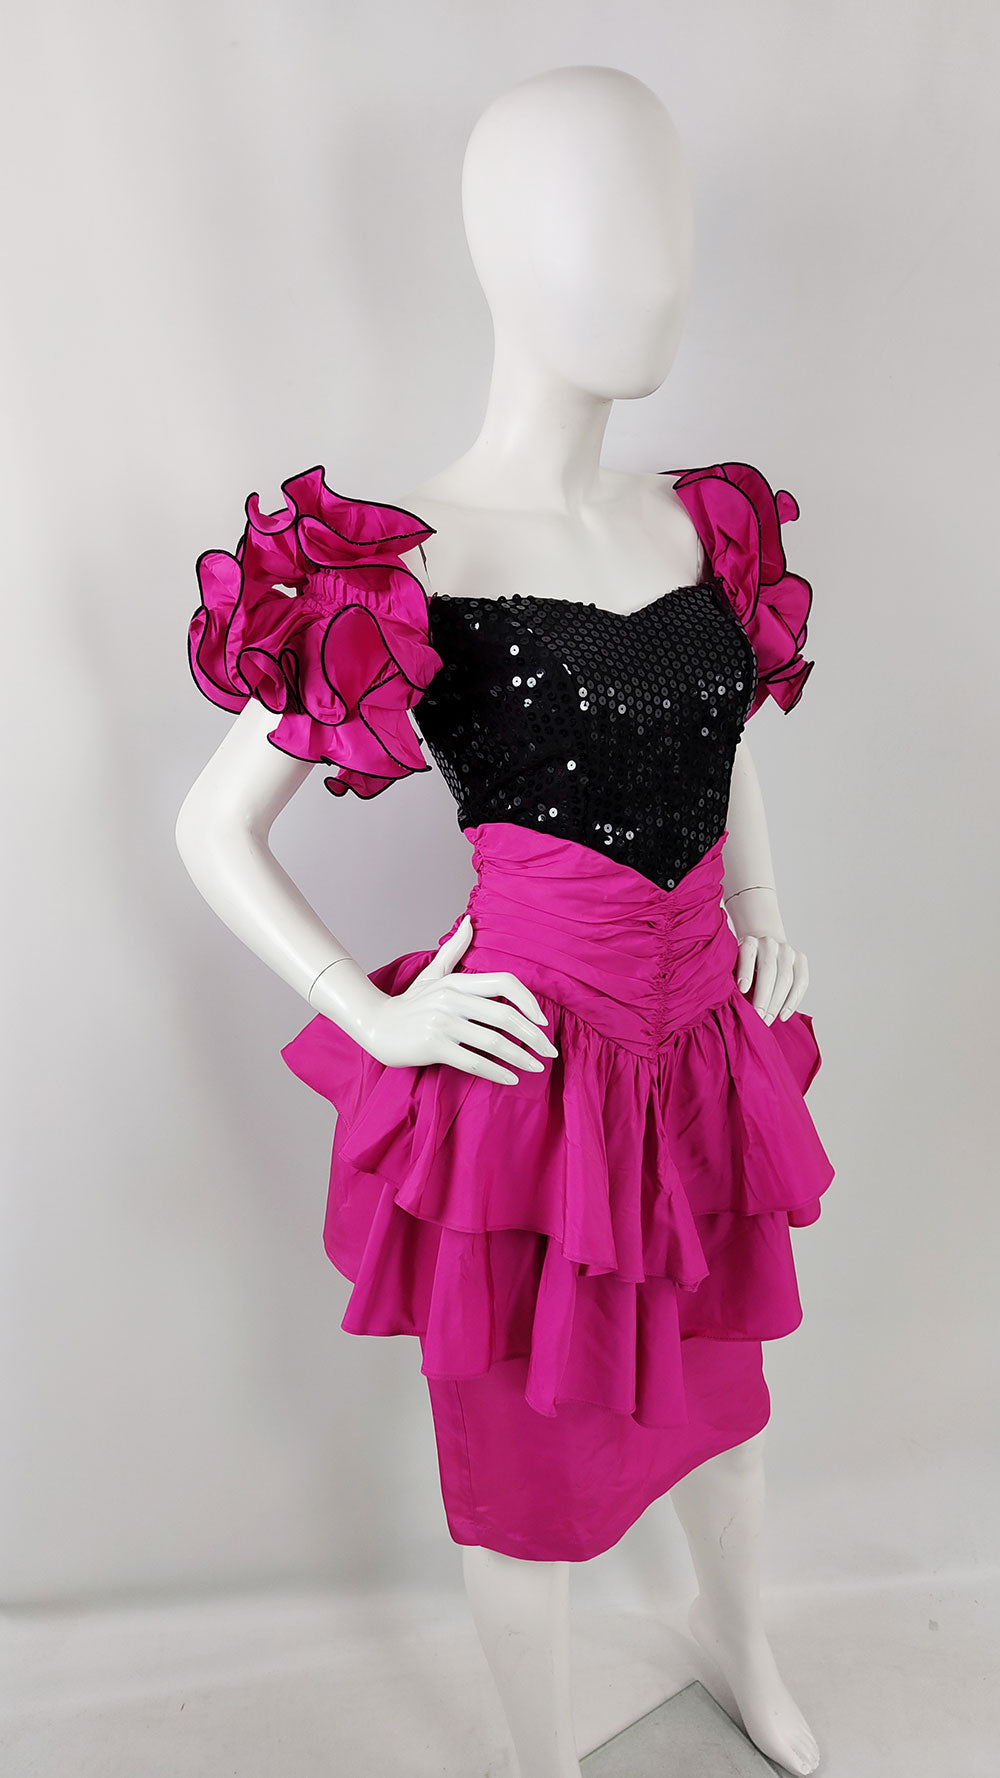 A true vintage 1980s prom dress in black and pink by American label, TNB.